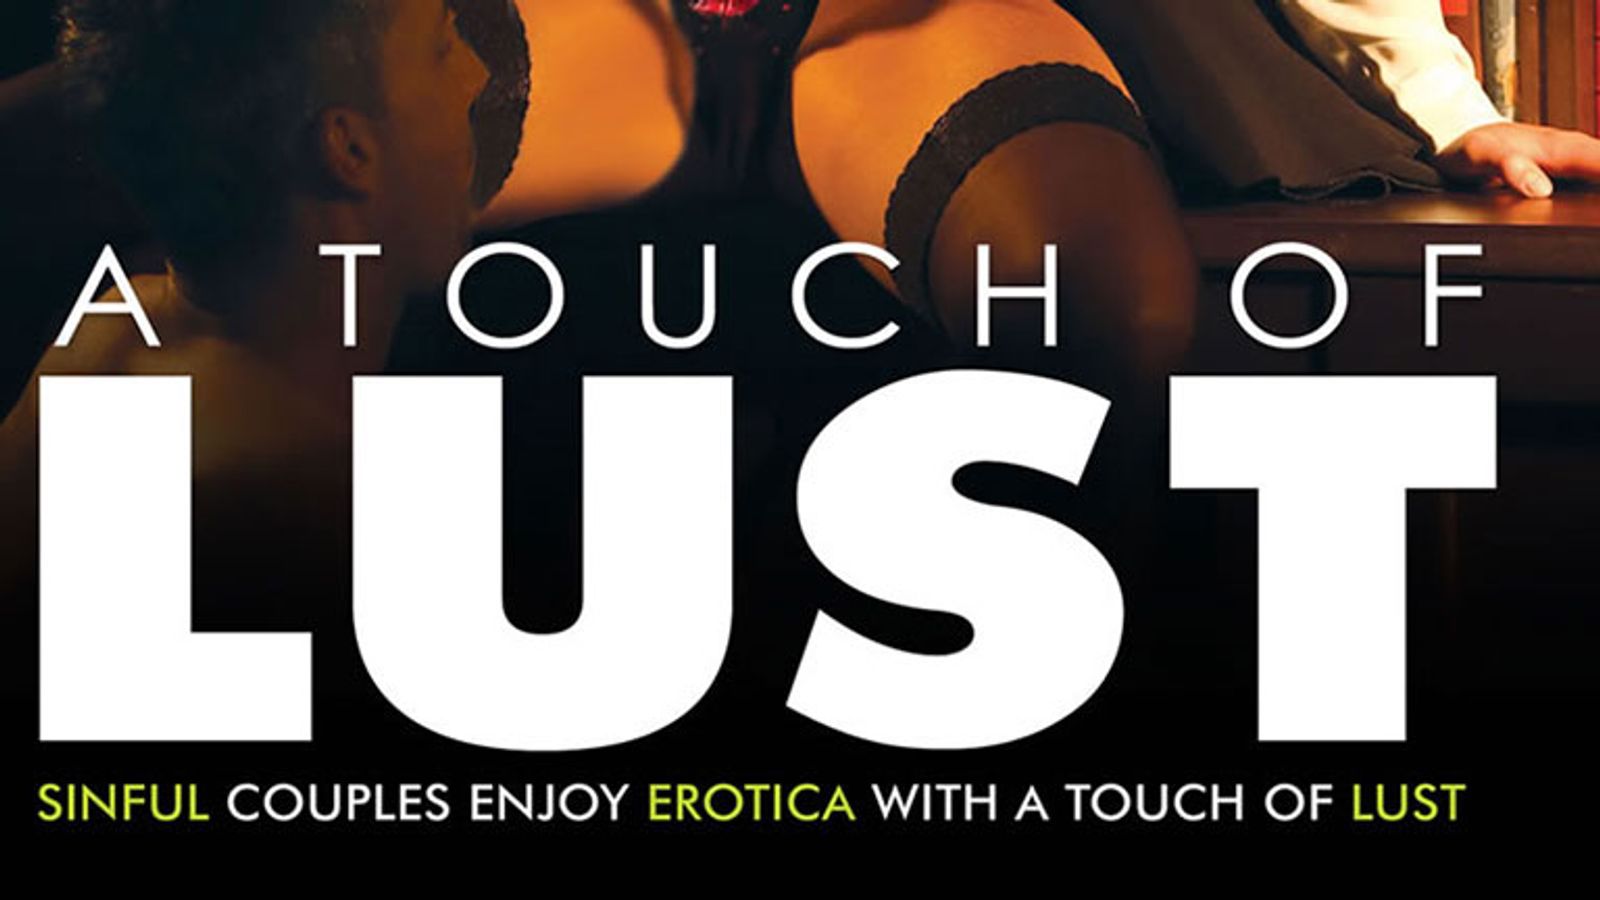 Roma Amor's SinfulXXX Releases Artful 'A Touch of Lust' Via Pure Play